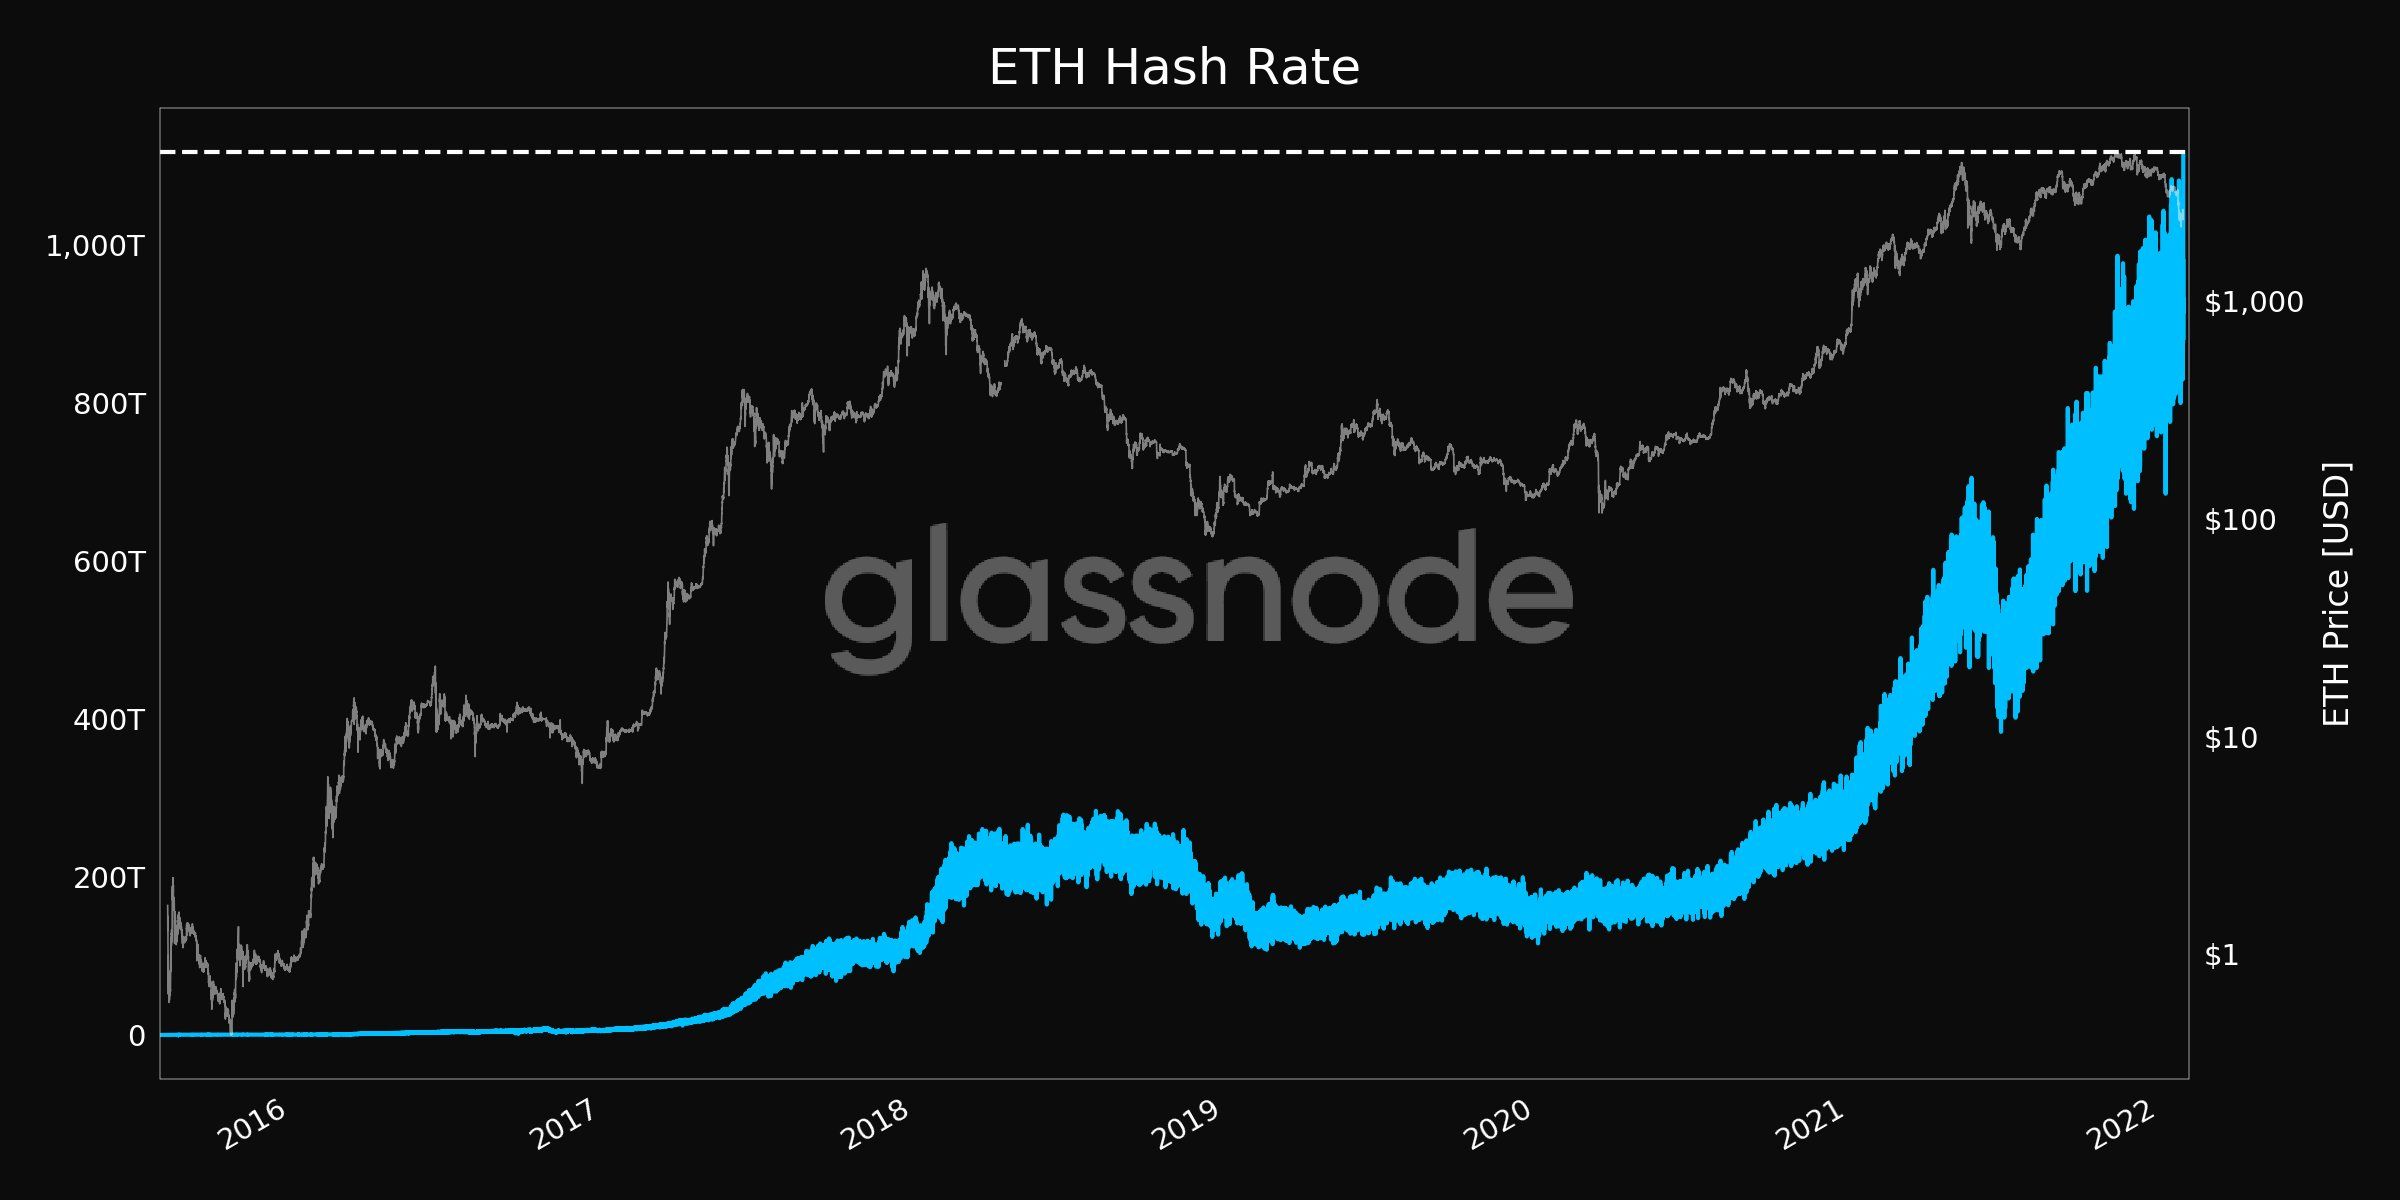 Ethereum Mining Hash Rate Reaches New ATH